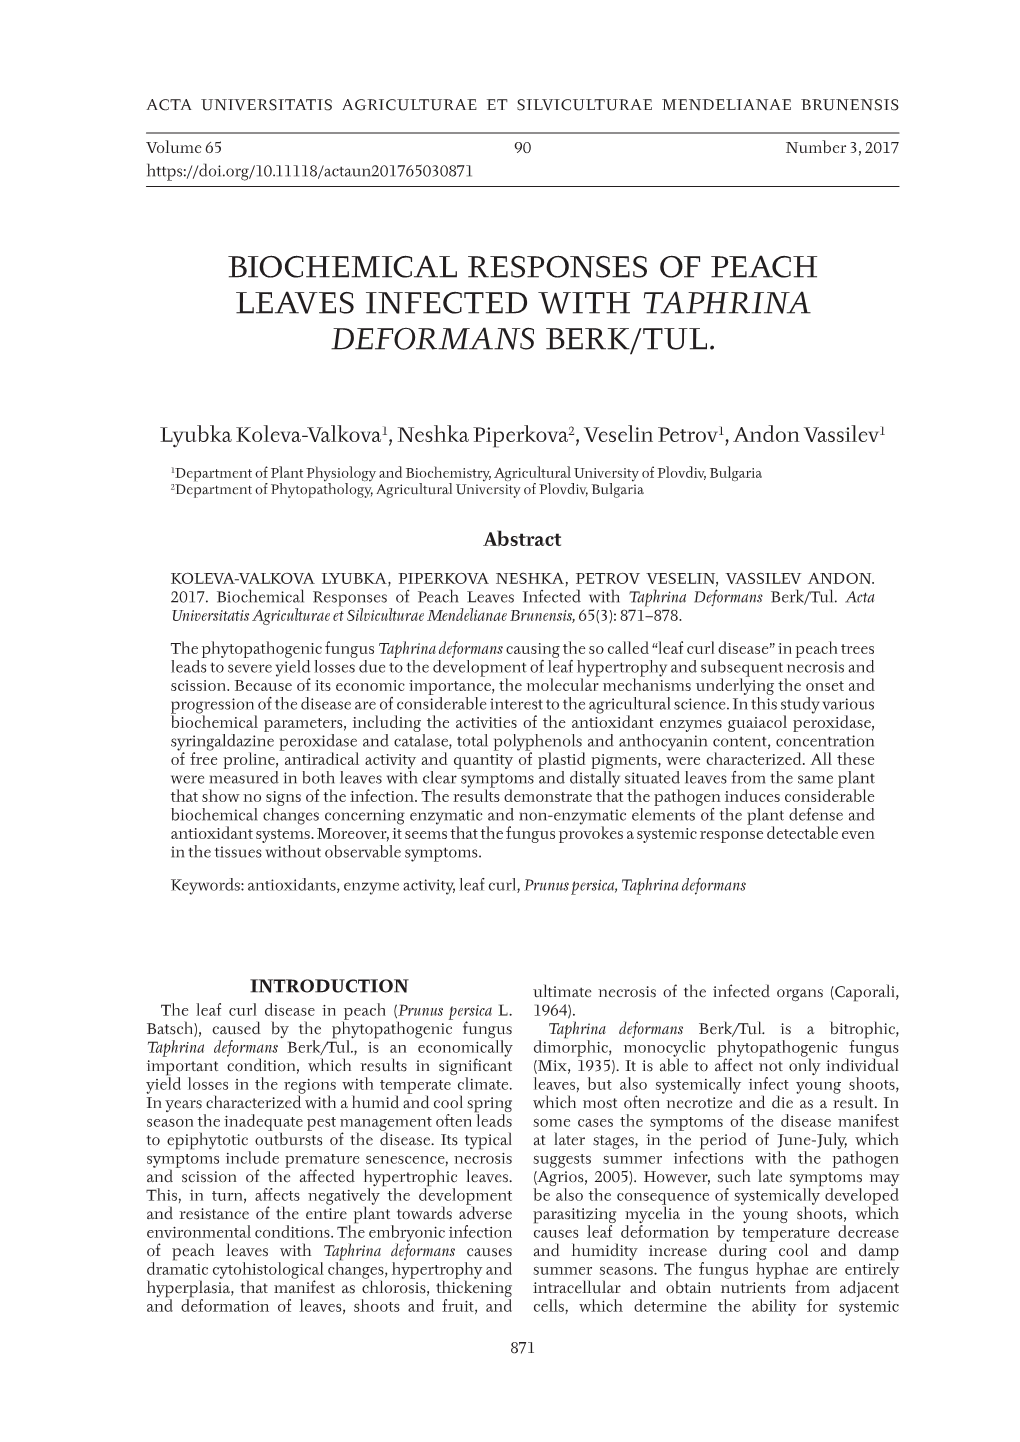 Biochemical Responses of Peach Leaves Infected with Taphrina Deformans Berk/Tul